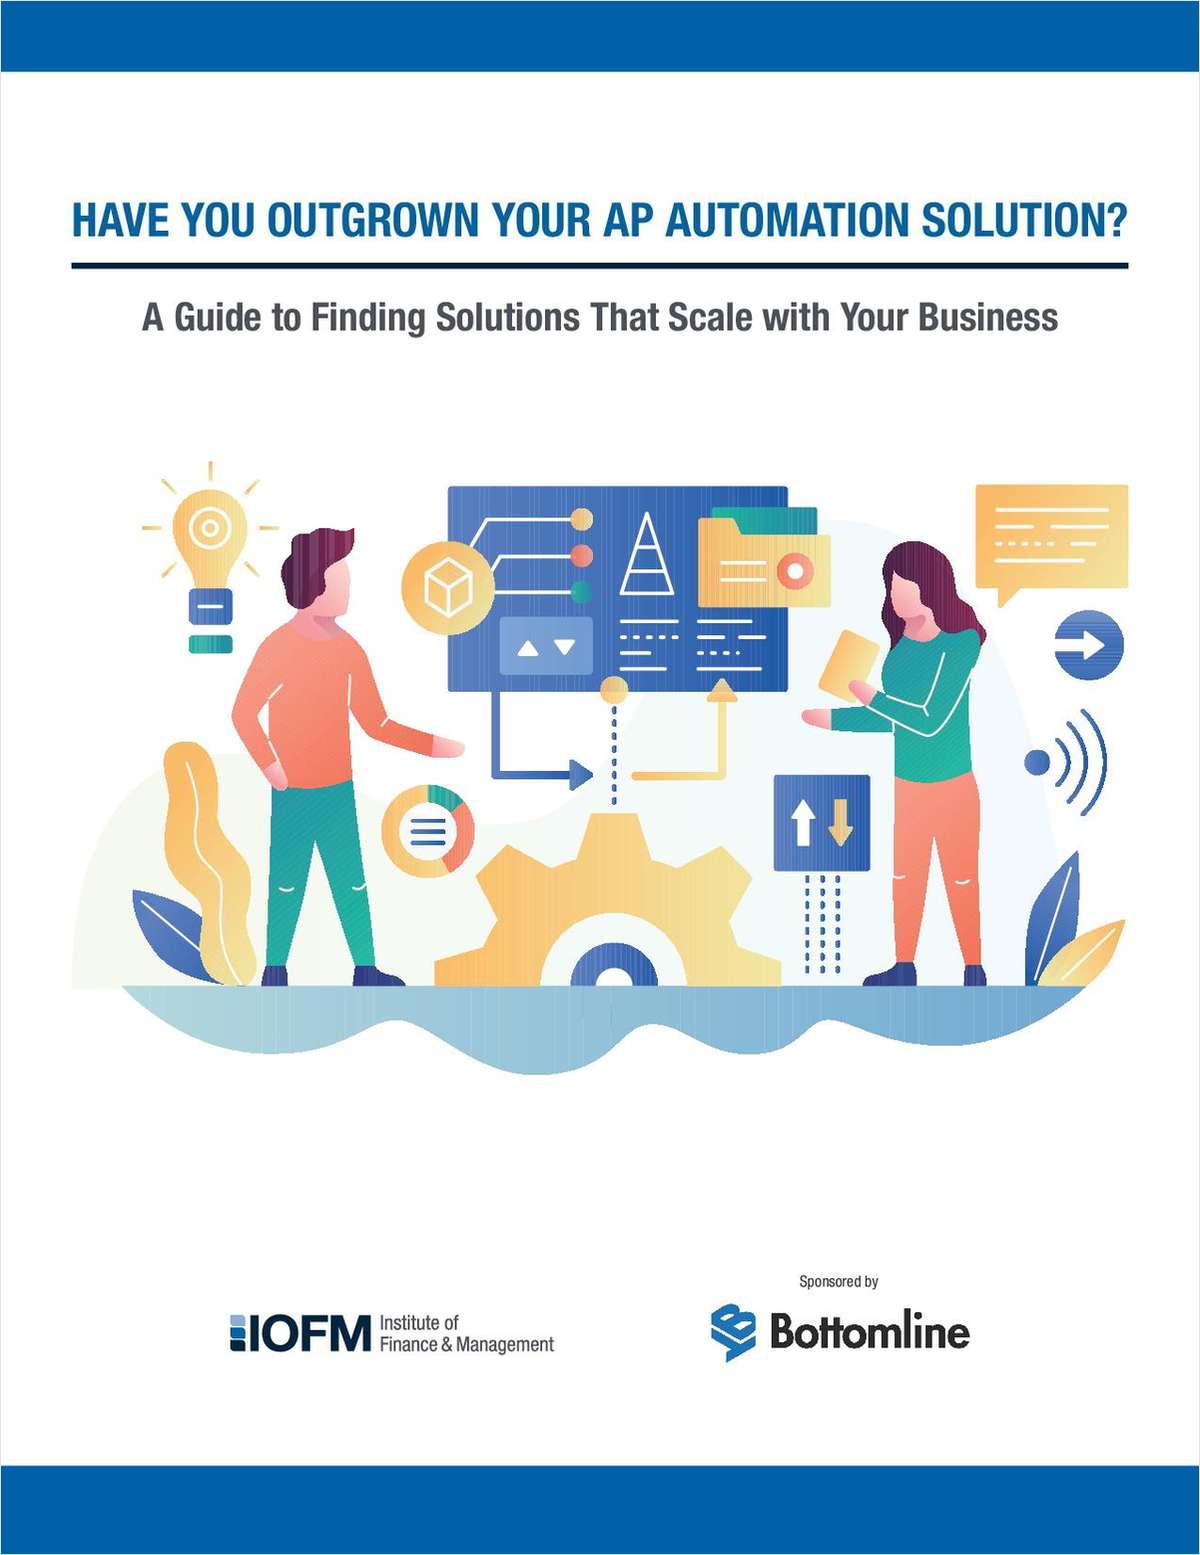 Have You Outgrown Your AP Automation Solution?